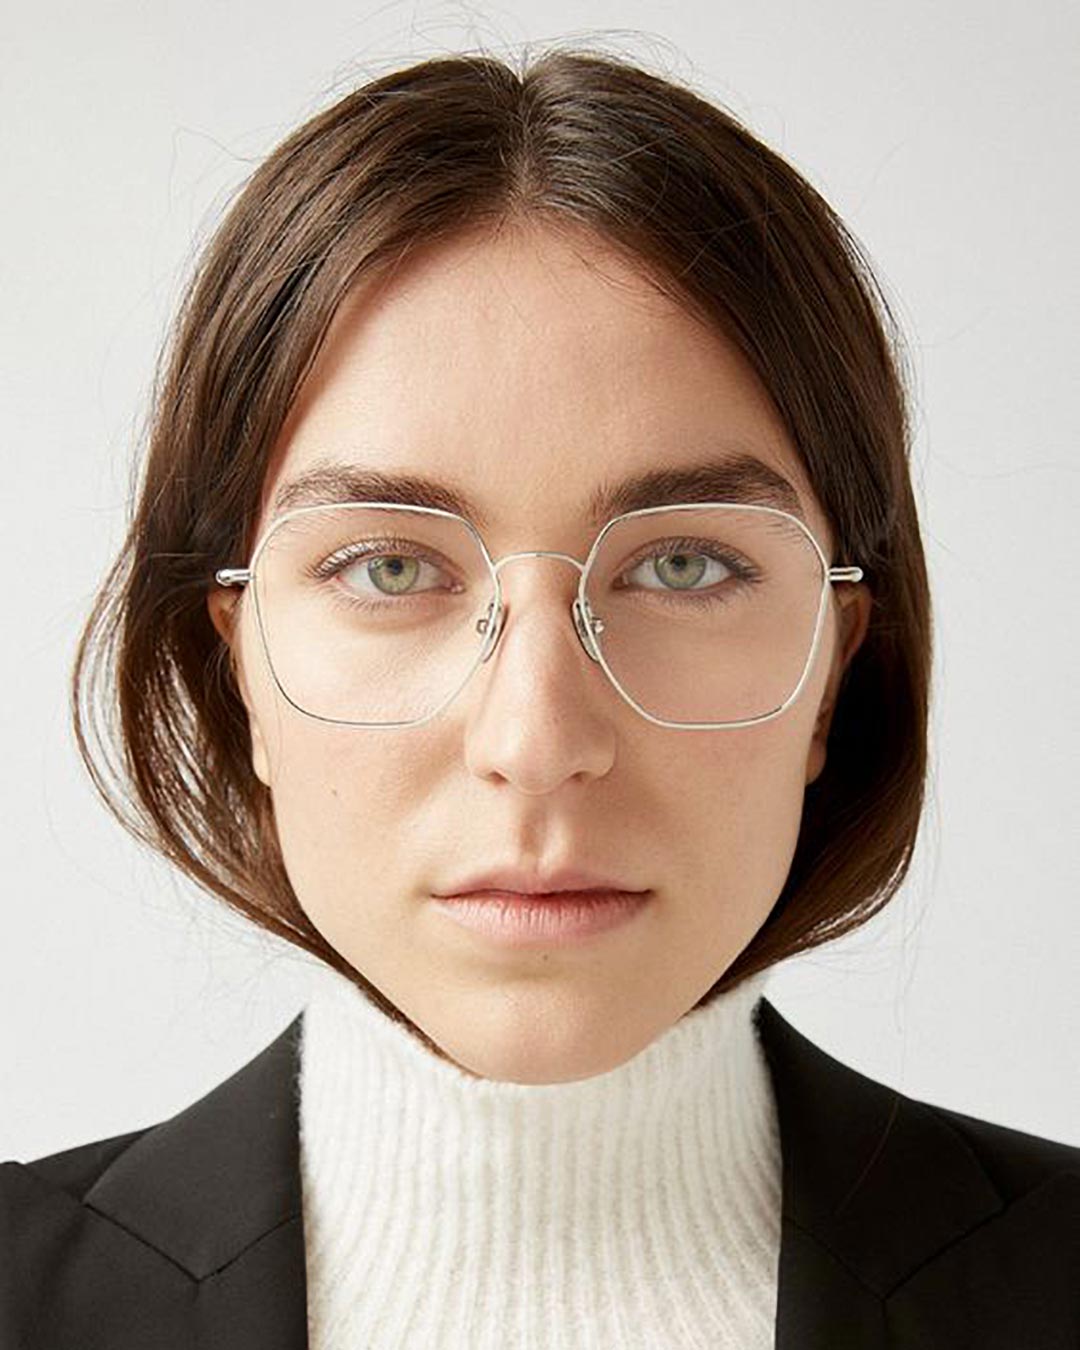 Woman with brown hair and square face wearing square wire frame eyeglasses looking straight on